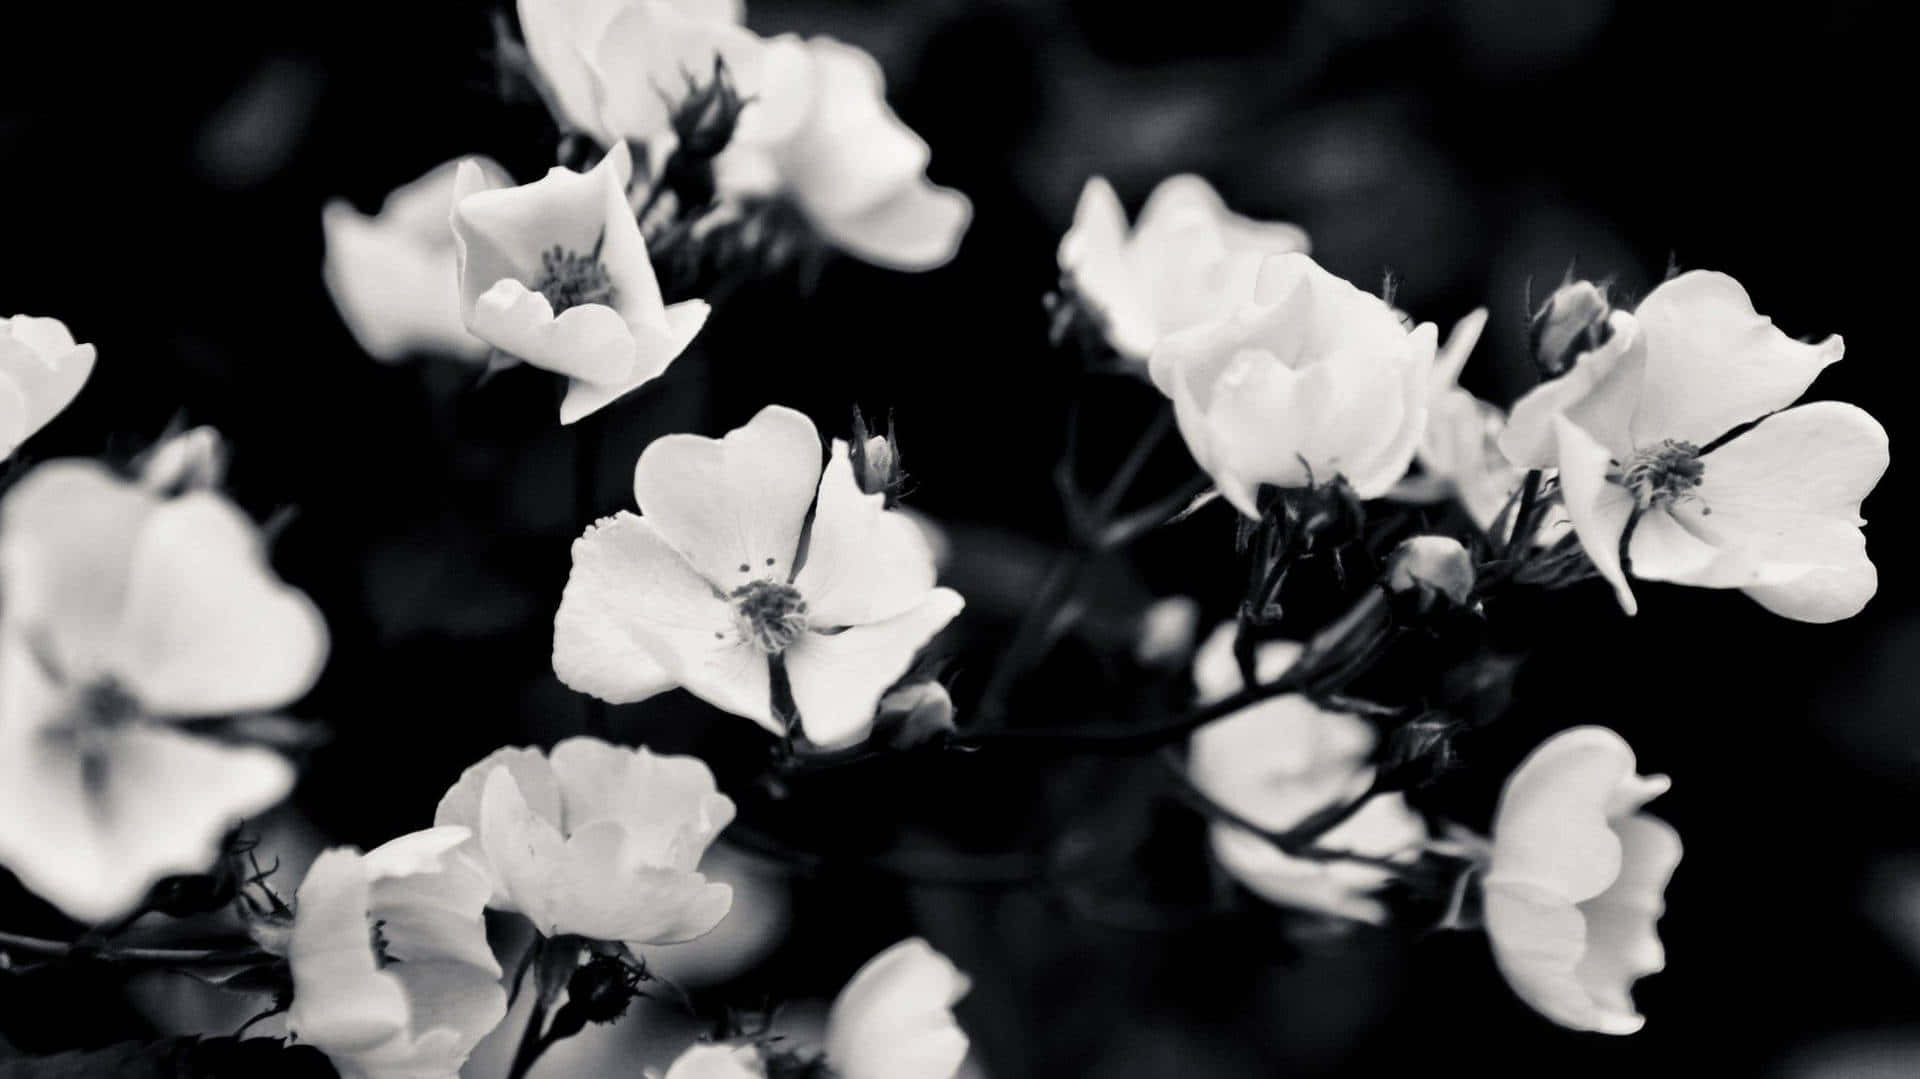 Black And White Flowers In A Black And White Photo Wallpaper